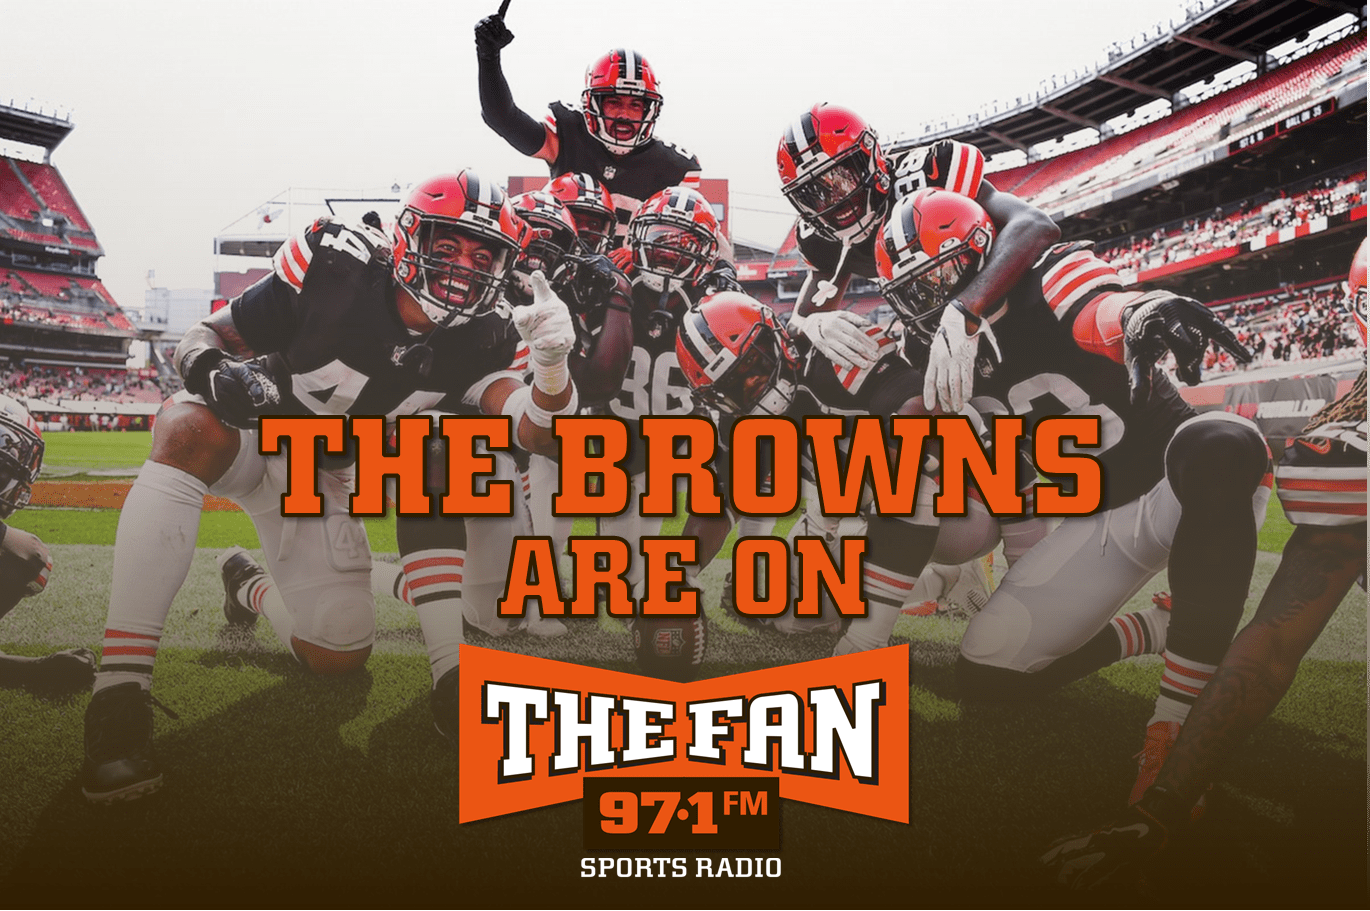 The-Browns-on-The-Fan